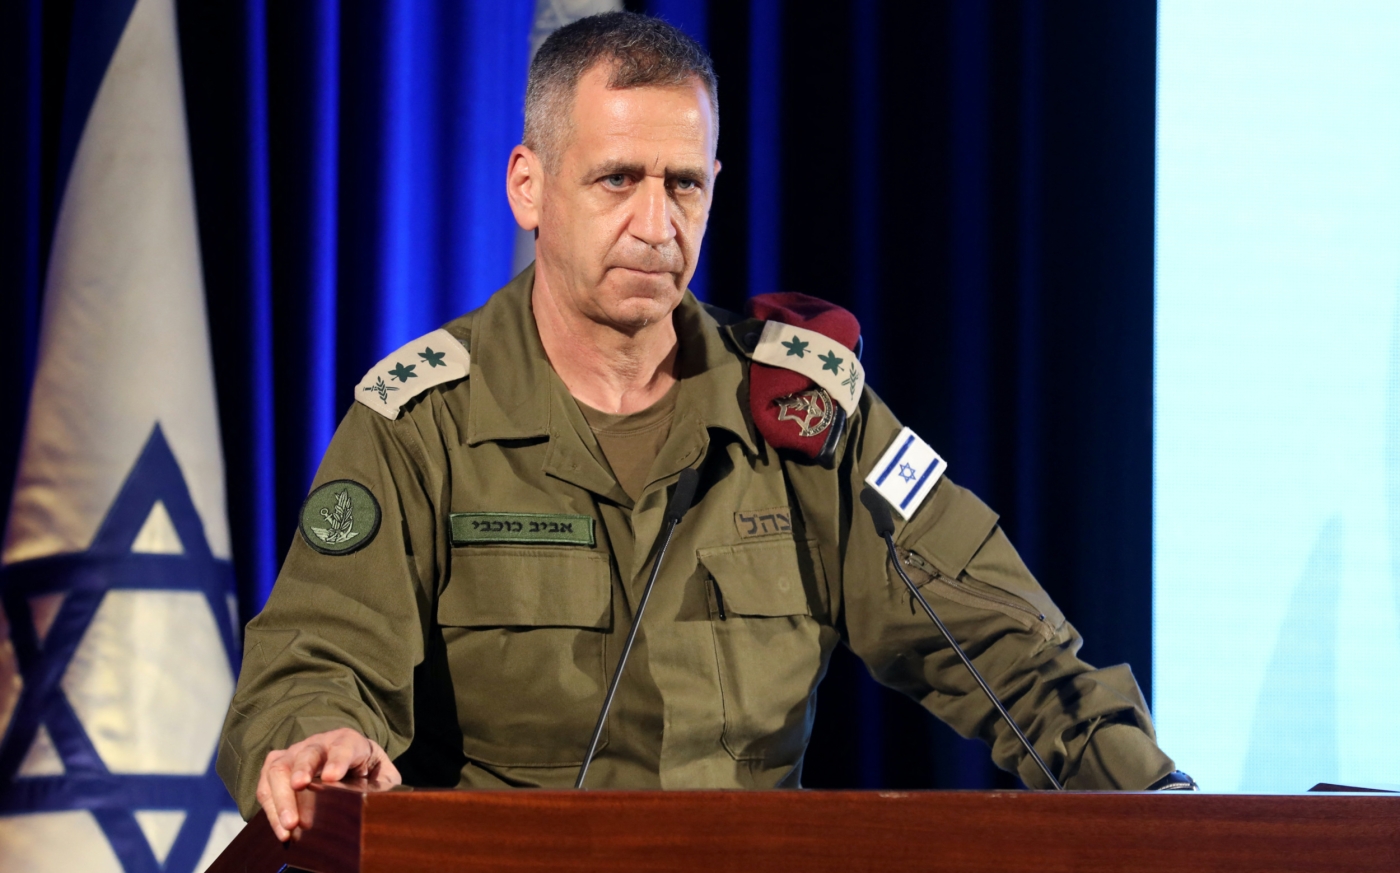 Israeli Armed Forces Chief of Staff Lt. Gen. Aviv Kochavi takes part in a candle lightning ceremony with Israeli soldiers in Jerusalem on 29 November 2021 (AFP)